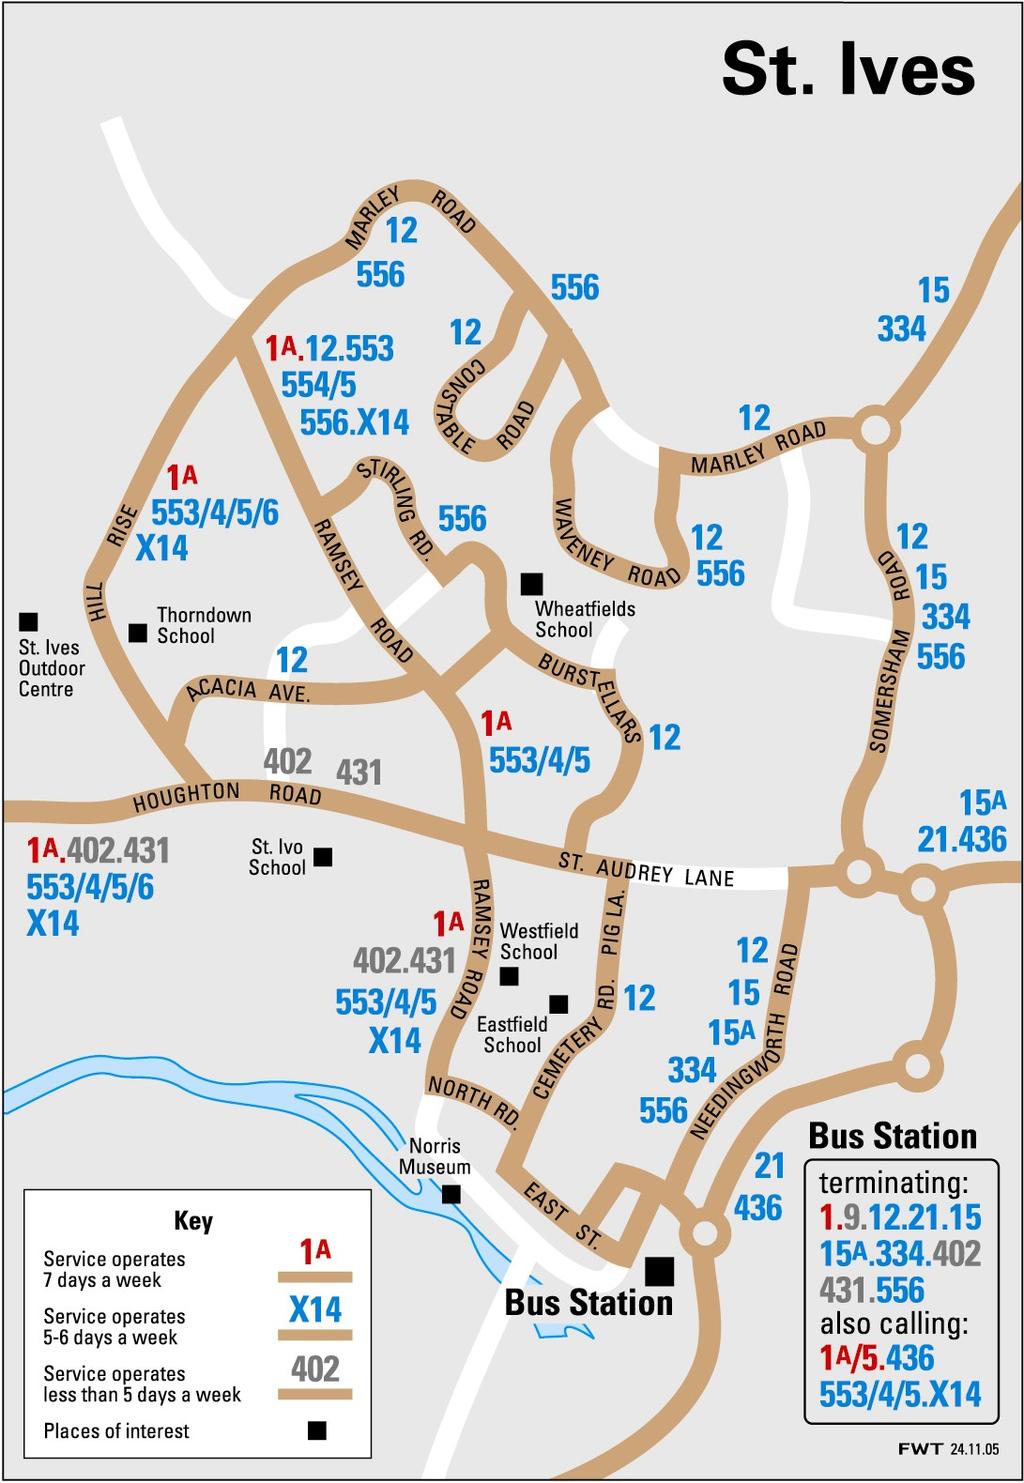 Map 4 Bus services in St. Ives Crown copyright.